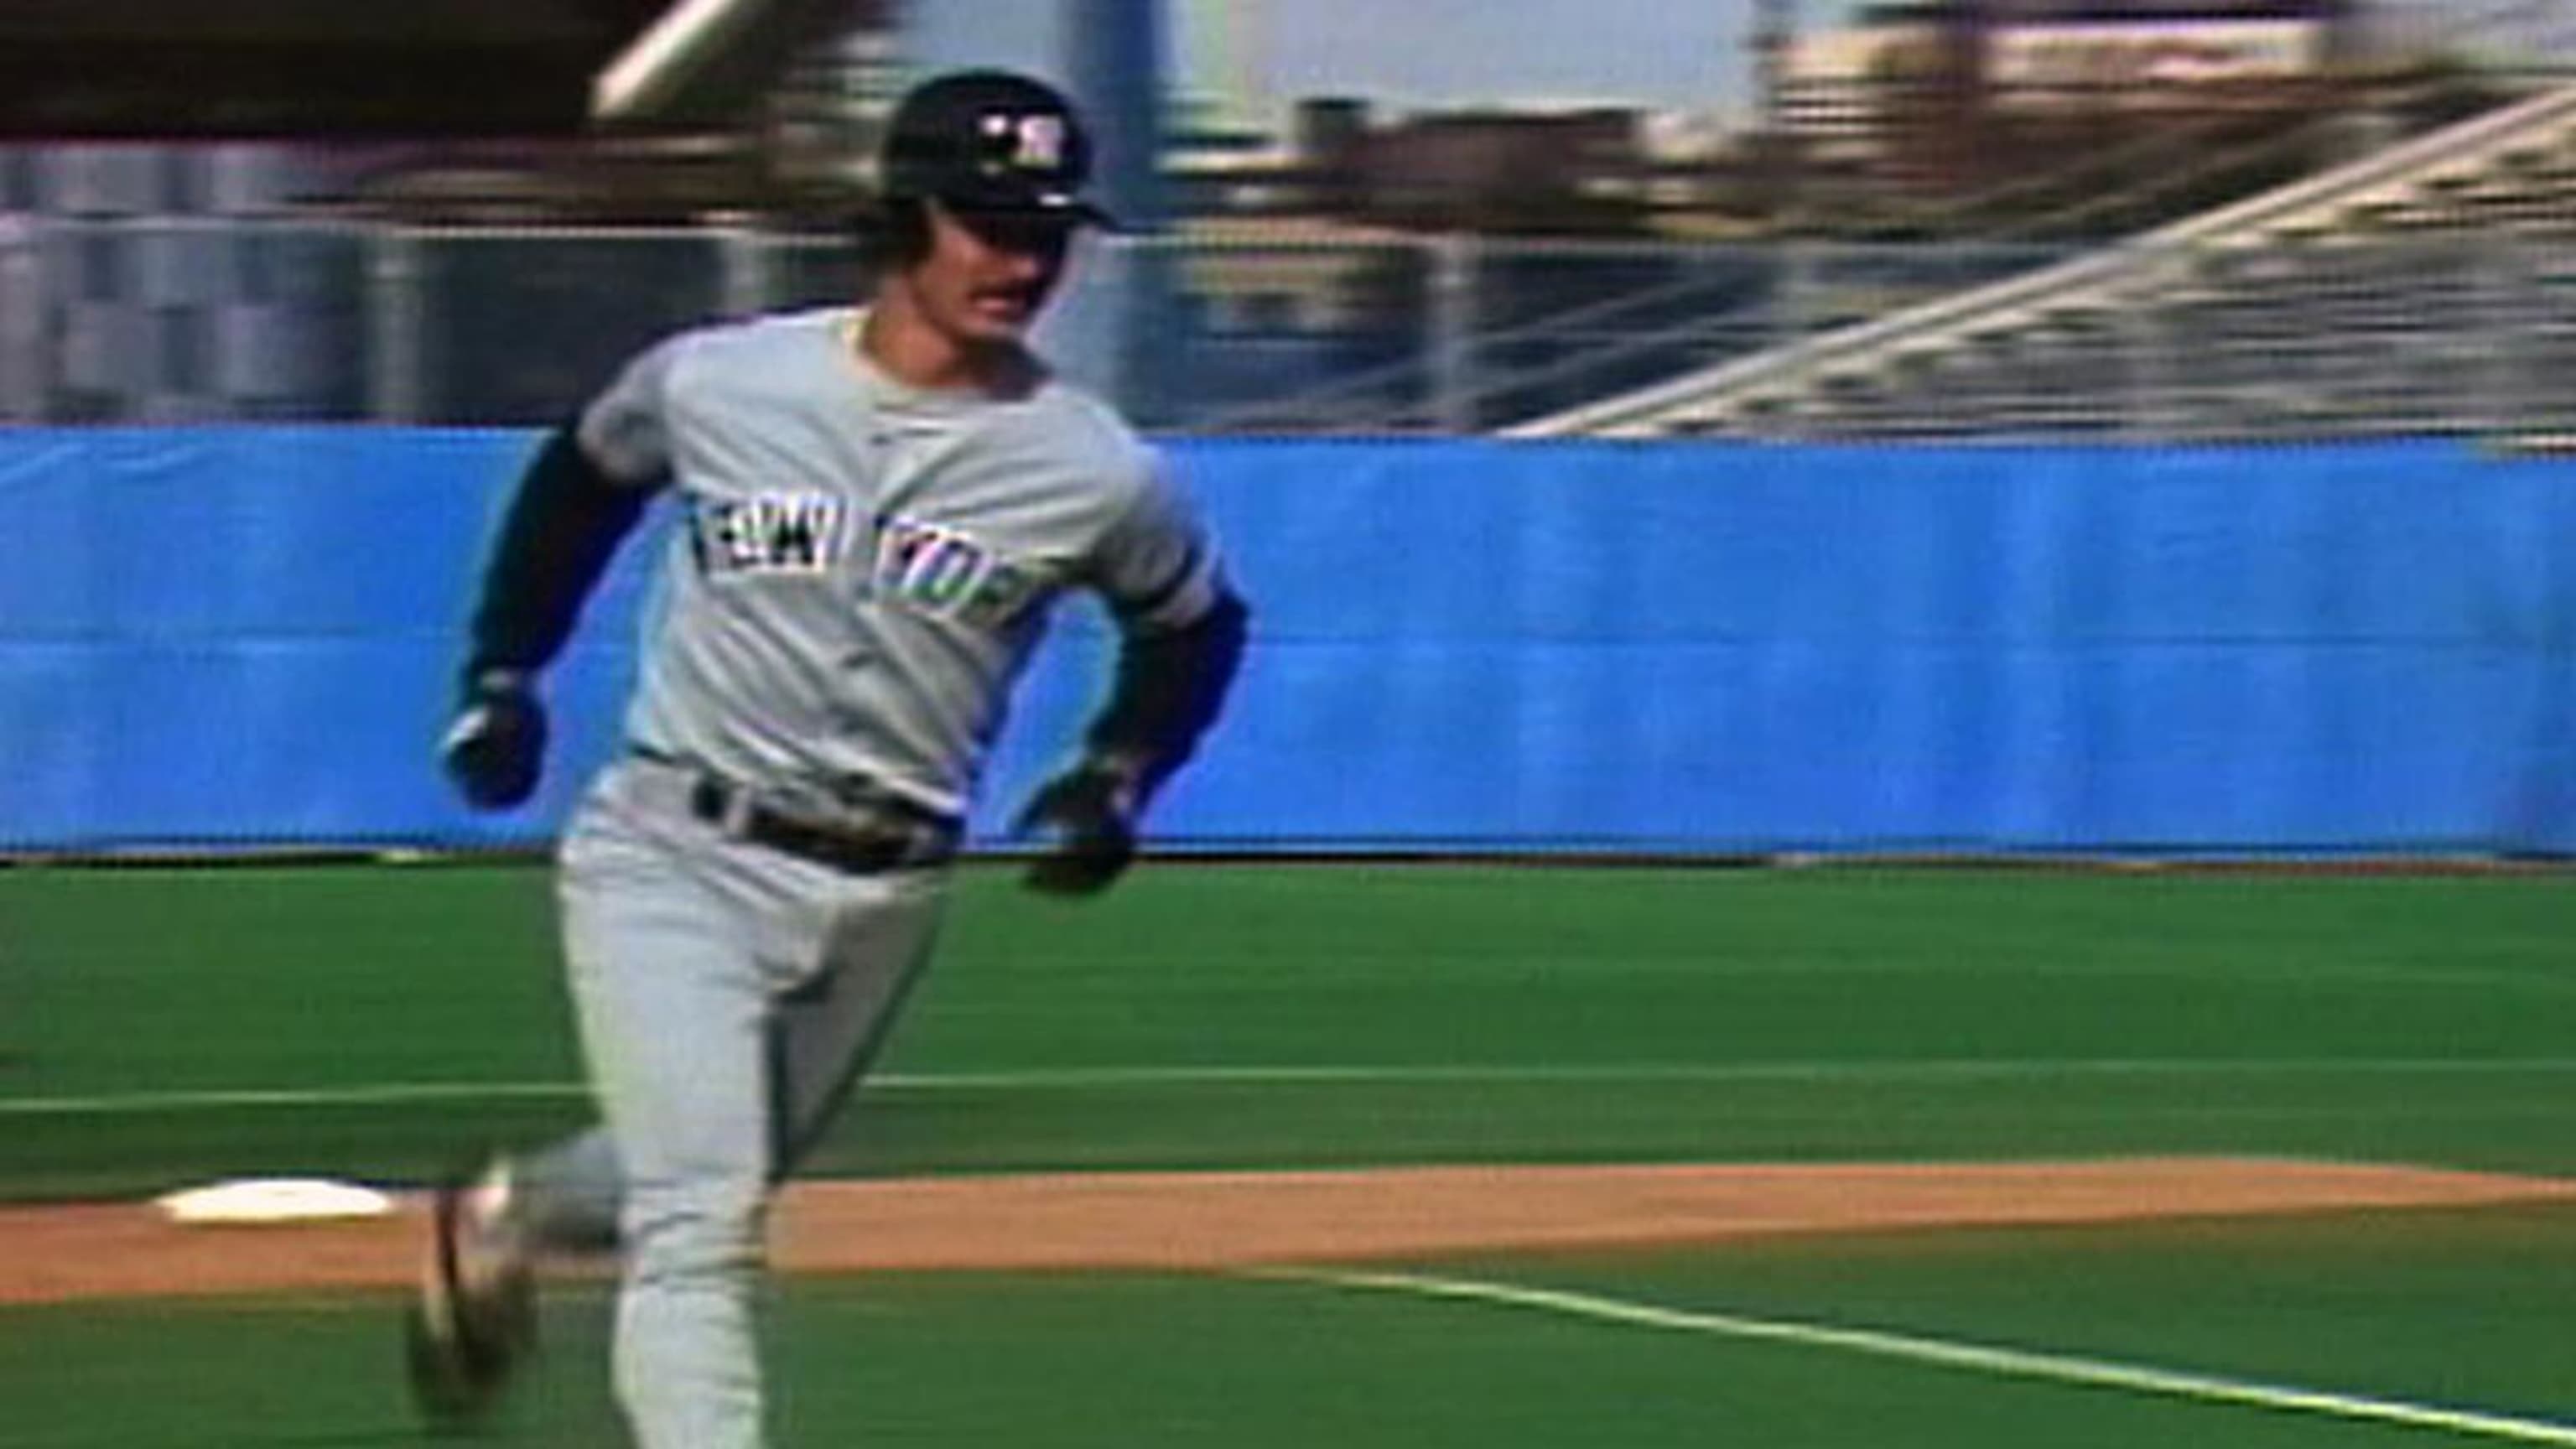 Not in Hall of Fame - 33. Don Mattingly